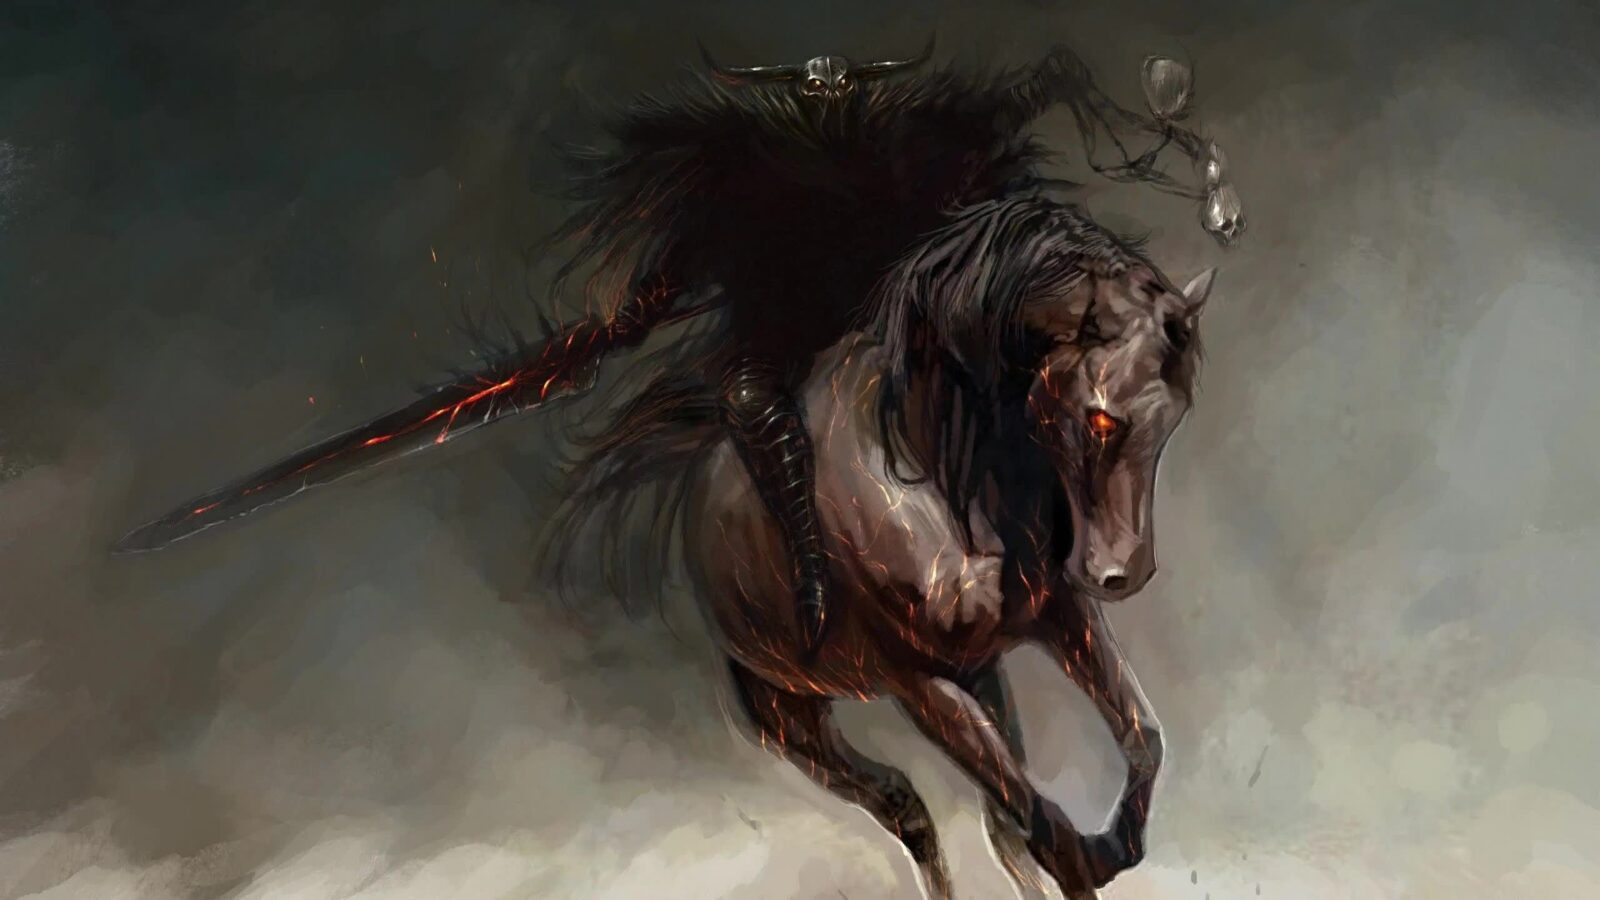 LiveWallpapers4Free.com | The Legend Of Horsey Black Knight 2K Quality - Free Live Wallpaper